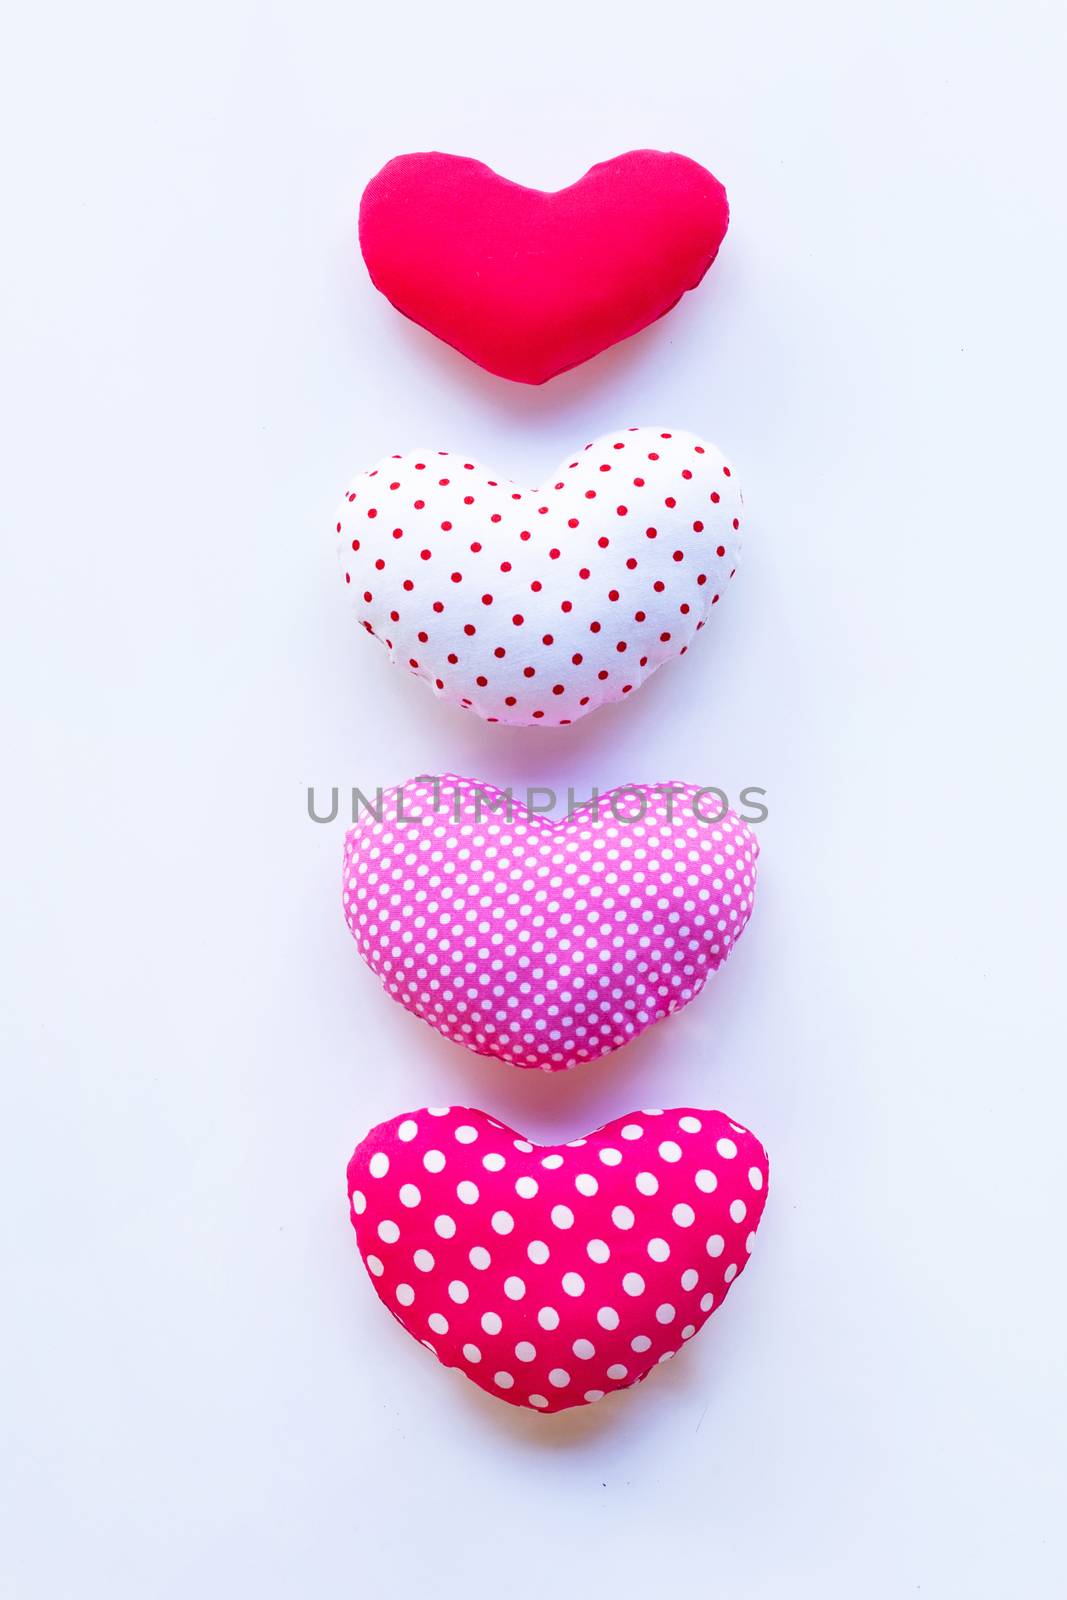 Valentine's hearts on white   by Bowonpat